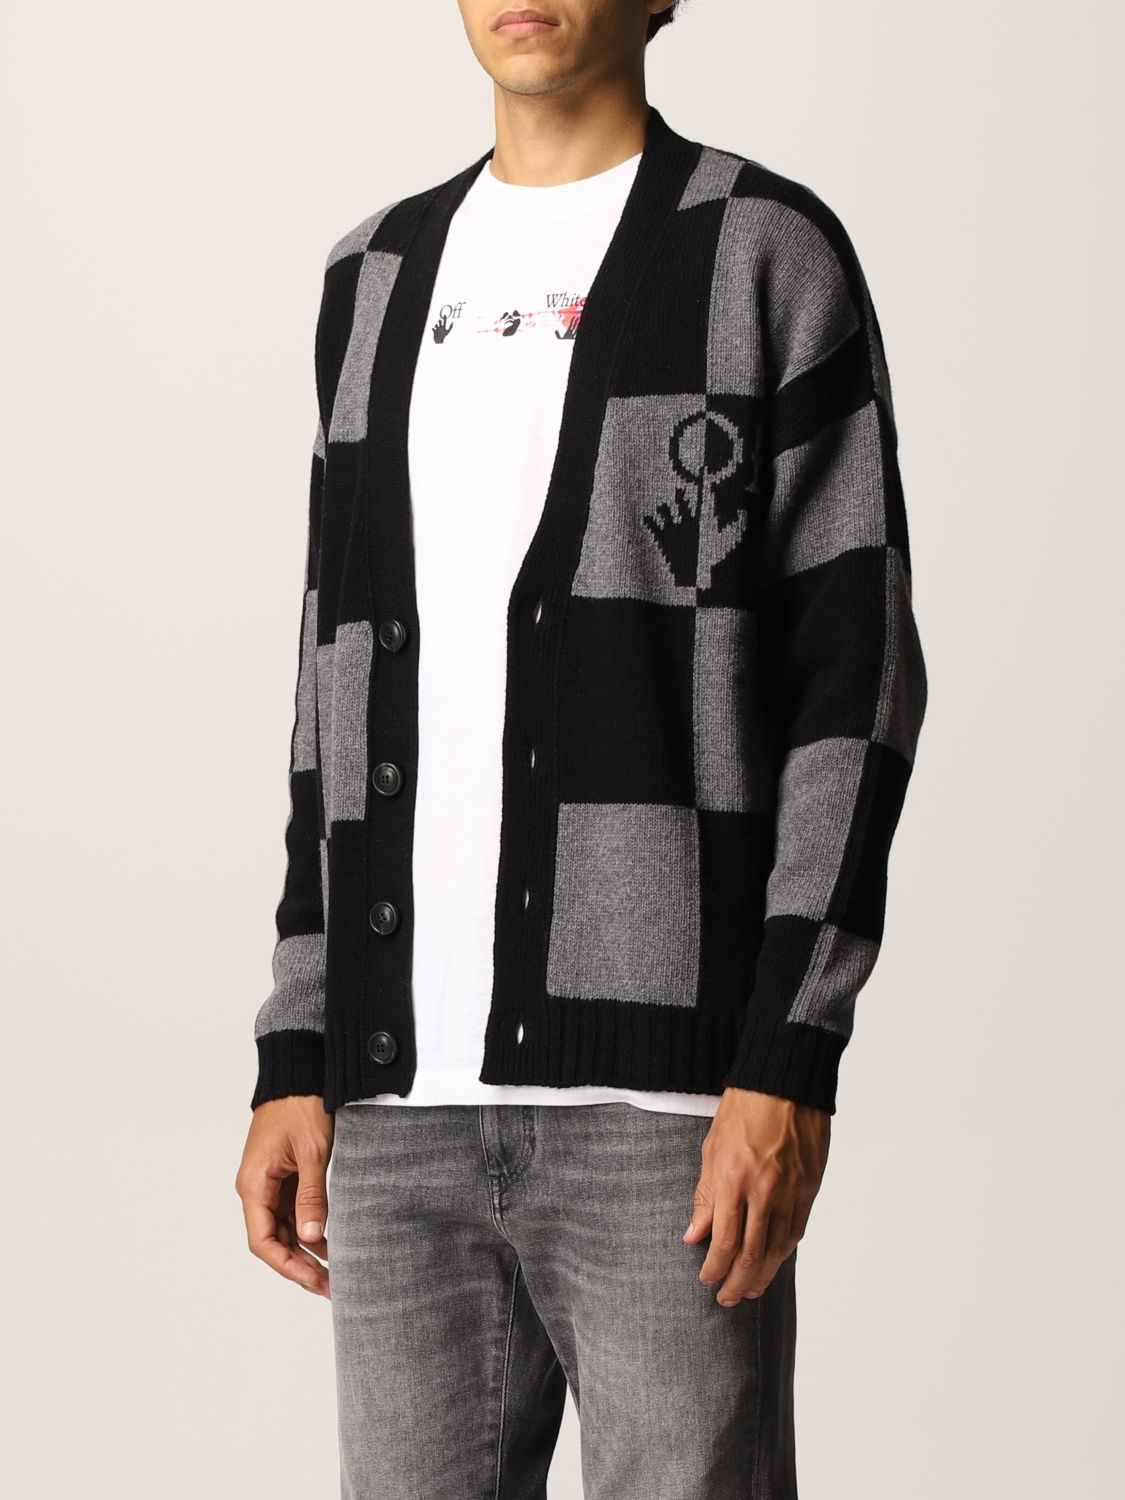 Være Seminary Motley OFF-WHITE: cardigan for man - Black | Off-White cardigan OMHB010F21KNI001  online on GIGLIO.COM